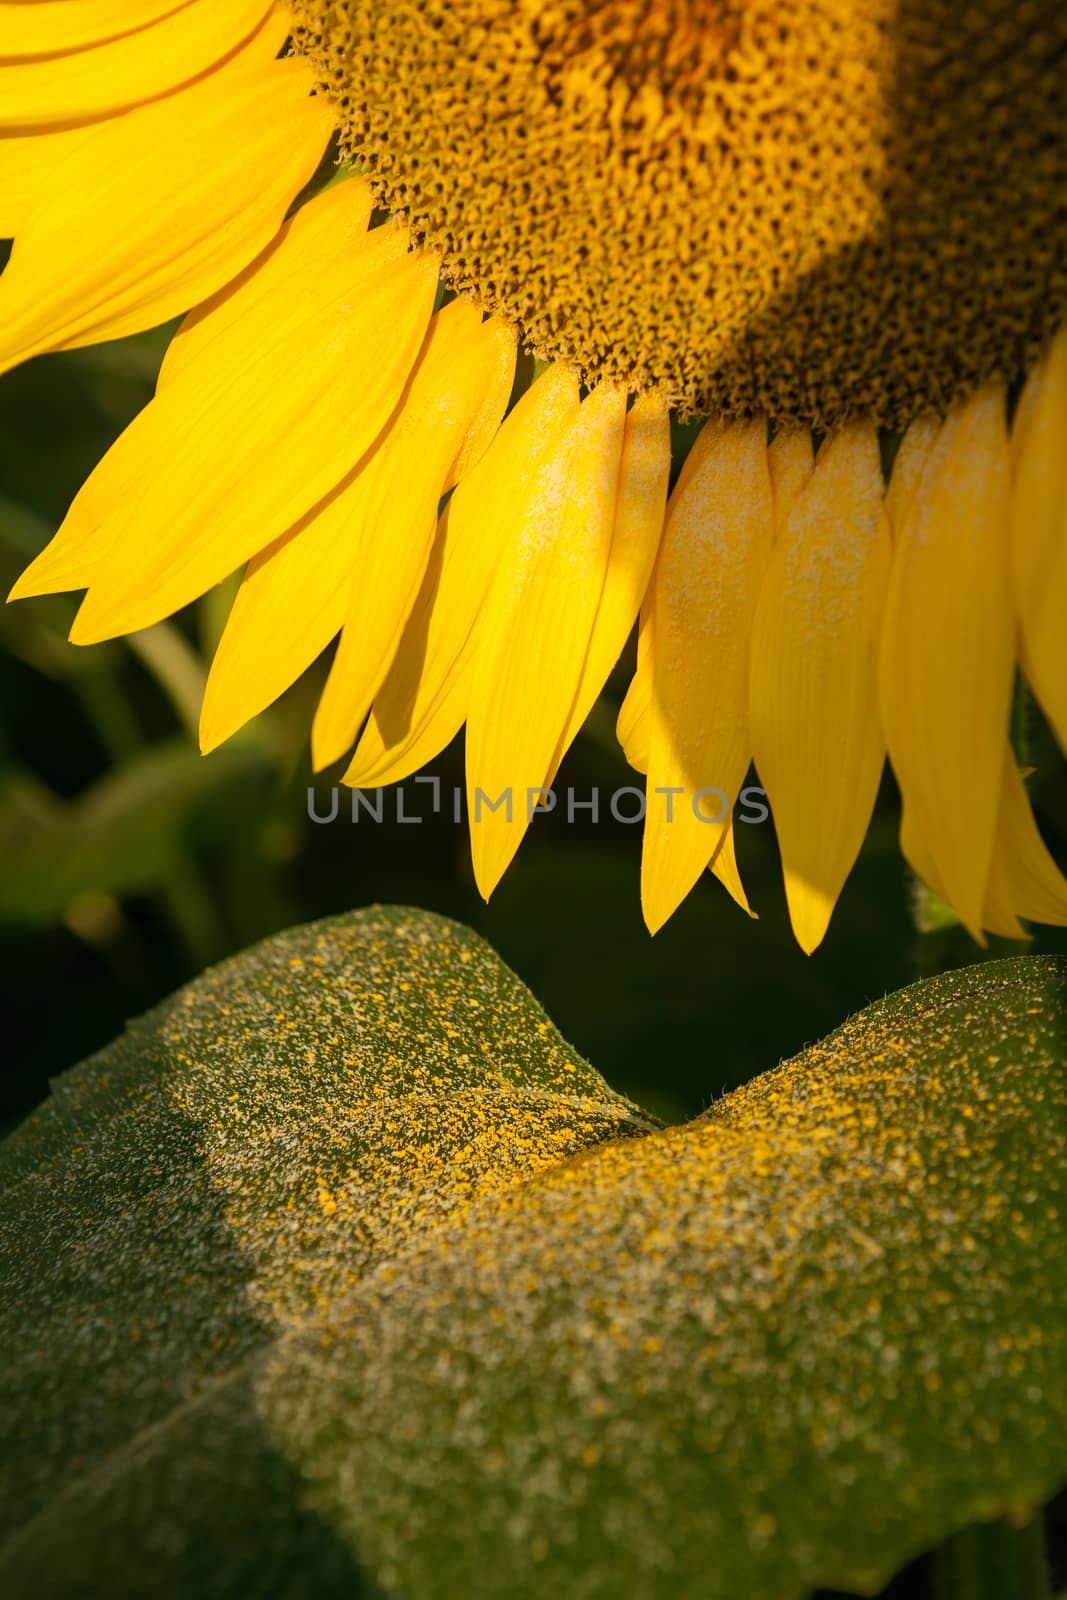 Detail of a sunflower with the dawn light